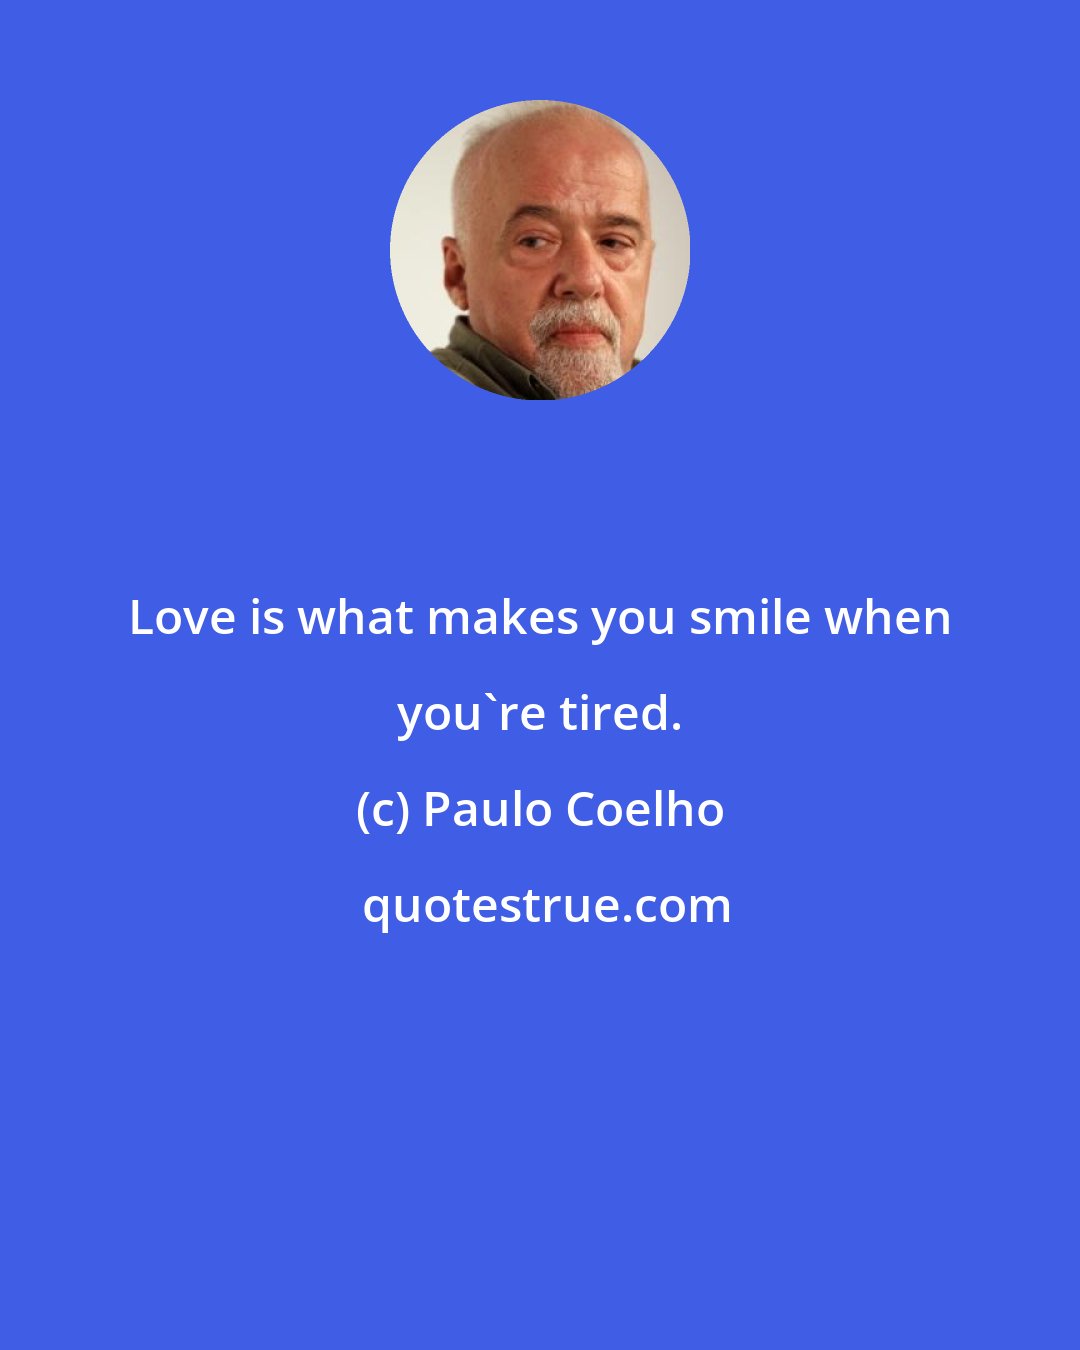 Paulo Coelho: Love is what makes you smile when you're tired.